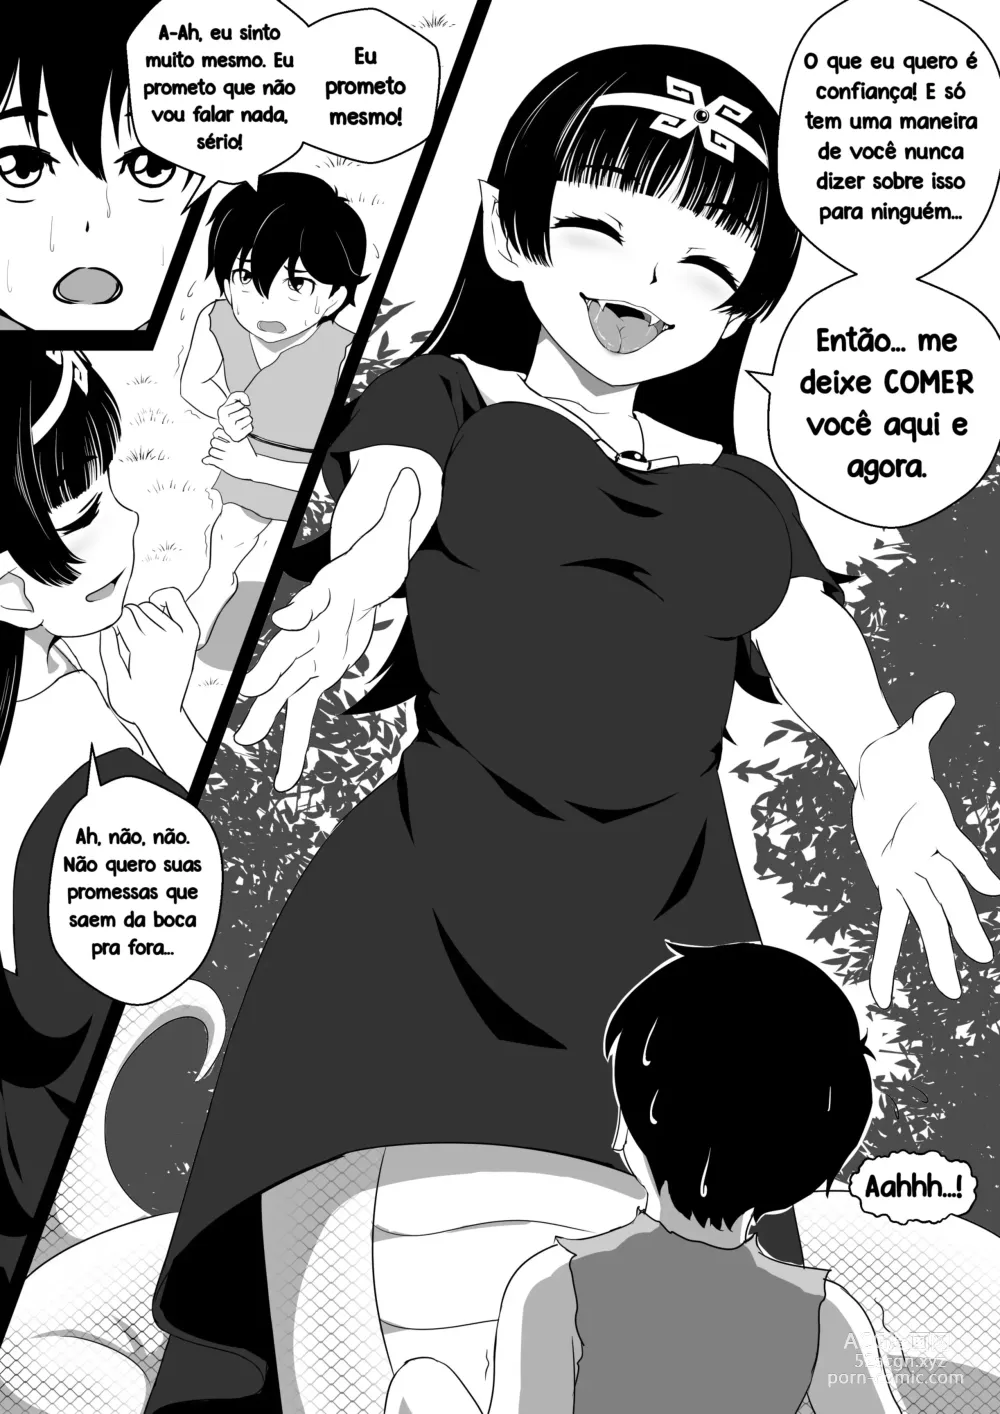 Page 6 of doujinshi Monstergirl Song - Snake Chapter [CG17] PT-BR